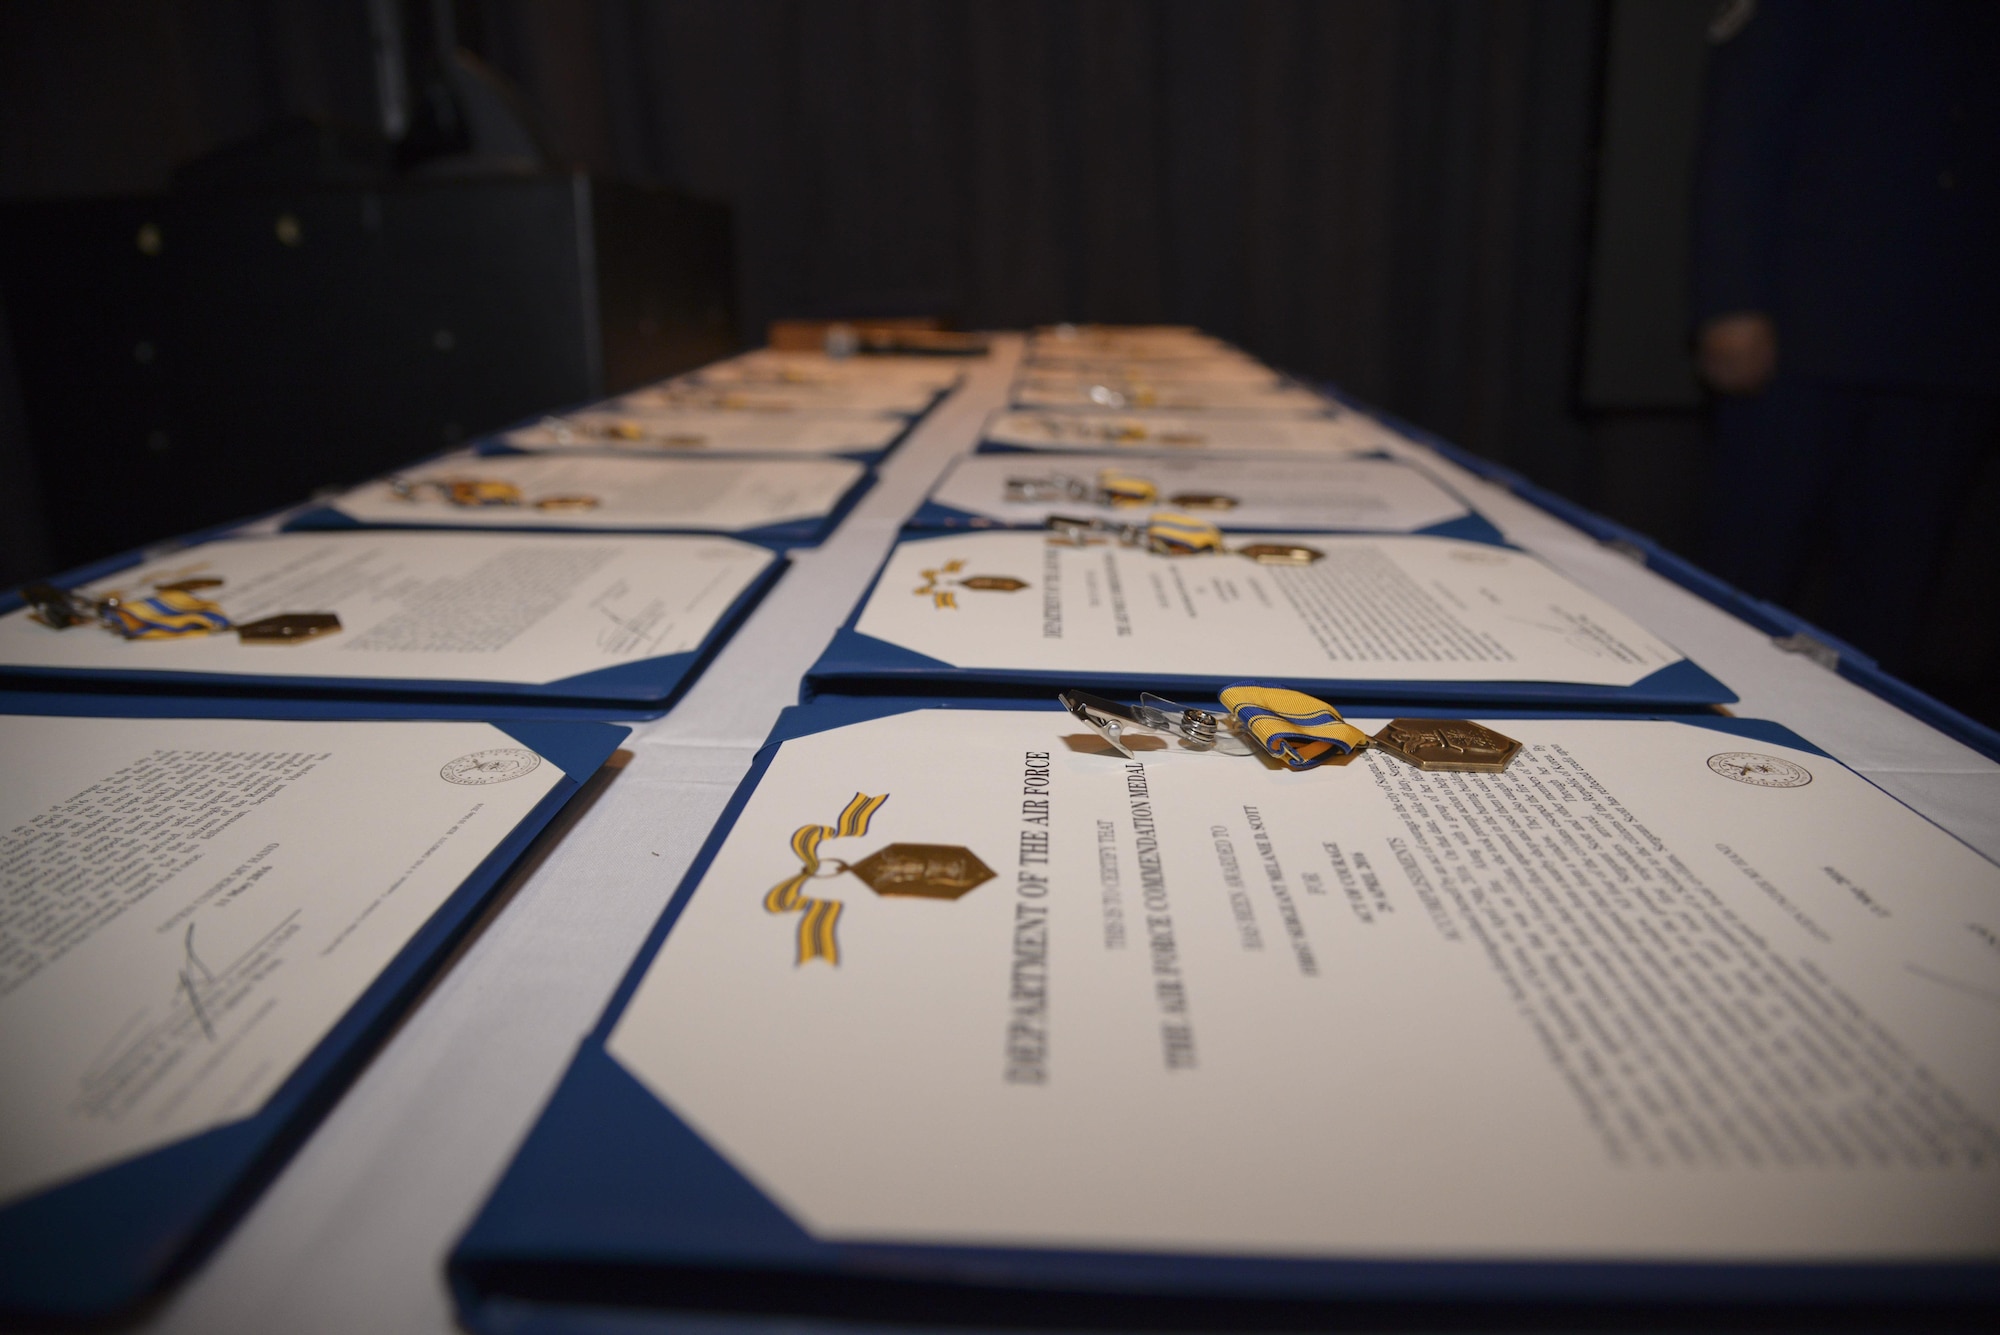 Fifteen awards await presentation during the Songtan fire rescue recognition ceremony at Osan Air Base, Republic of Korea, May 13, 2016. Each Airman and Soldier involved with the rescue received an Air Force Commendation Medal and the civilian received a Command Civilian Award For Valor. (U.S. Air Force photo by Tech. Sgt. Travis Edwards)